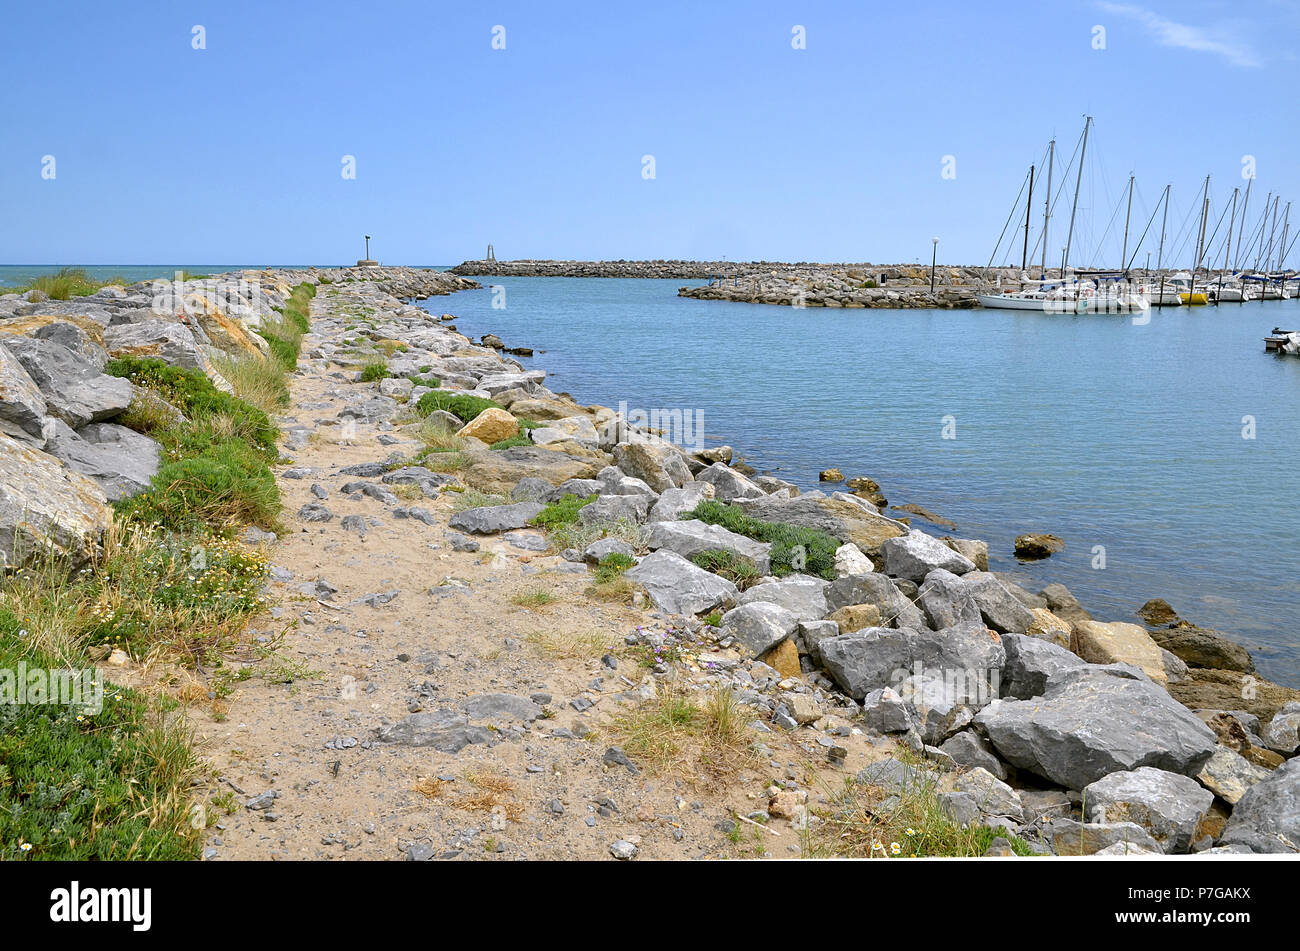 Port of Saint-Pierre-de-la-Mer depending on the commune of Fleury, in southern France in the Languedoc-Roussillon region Stock Photo